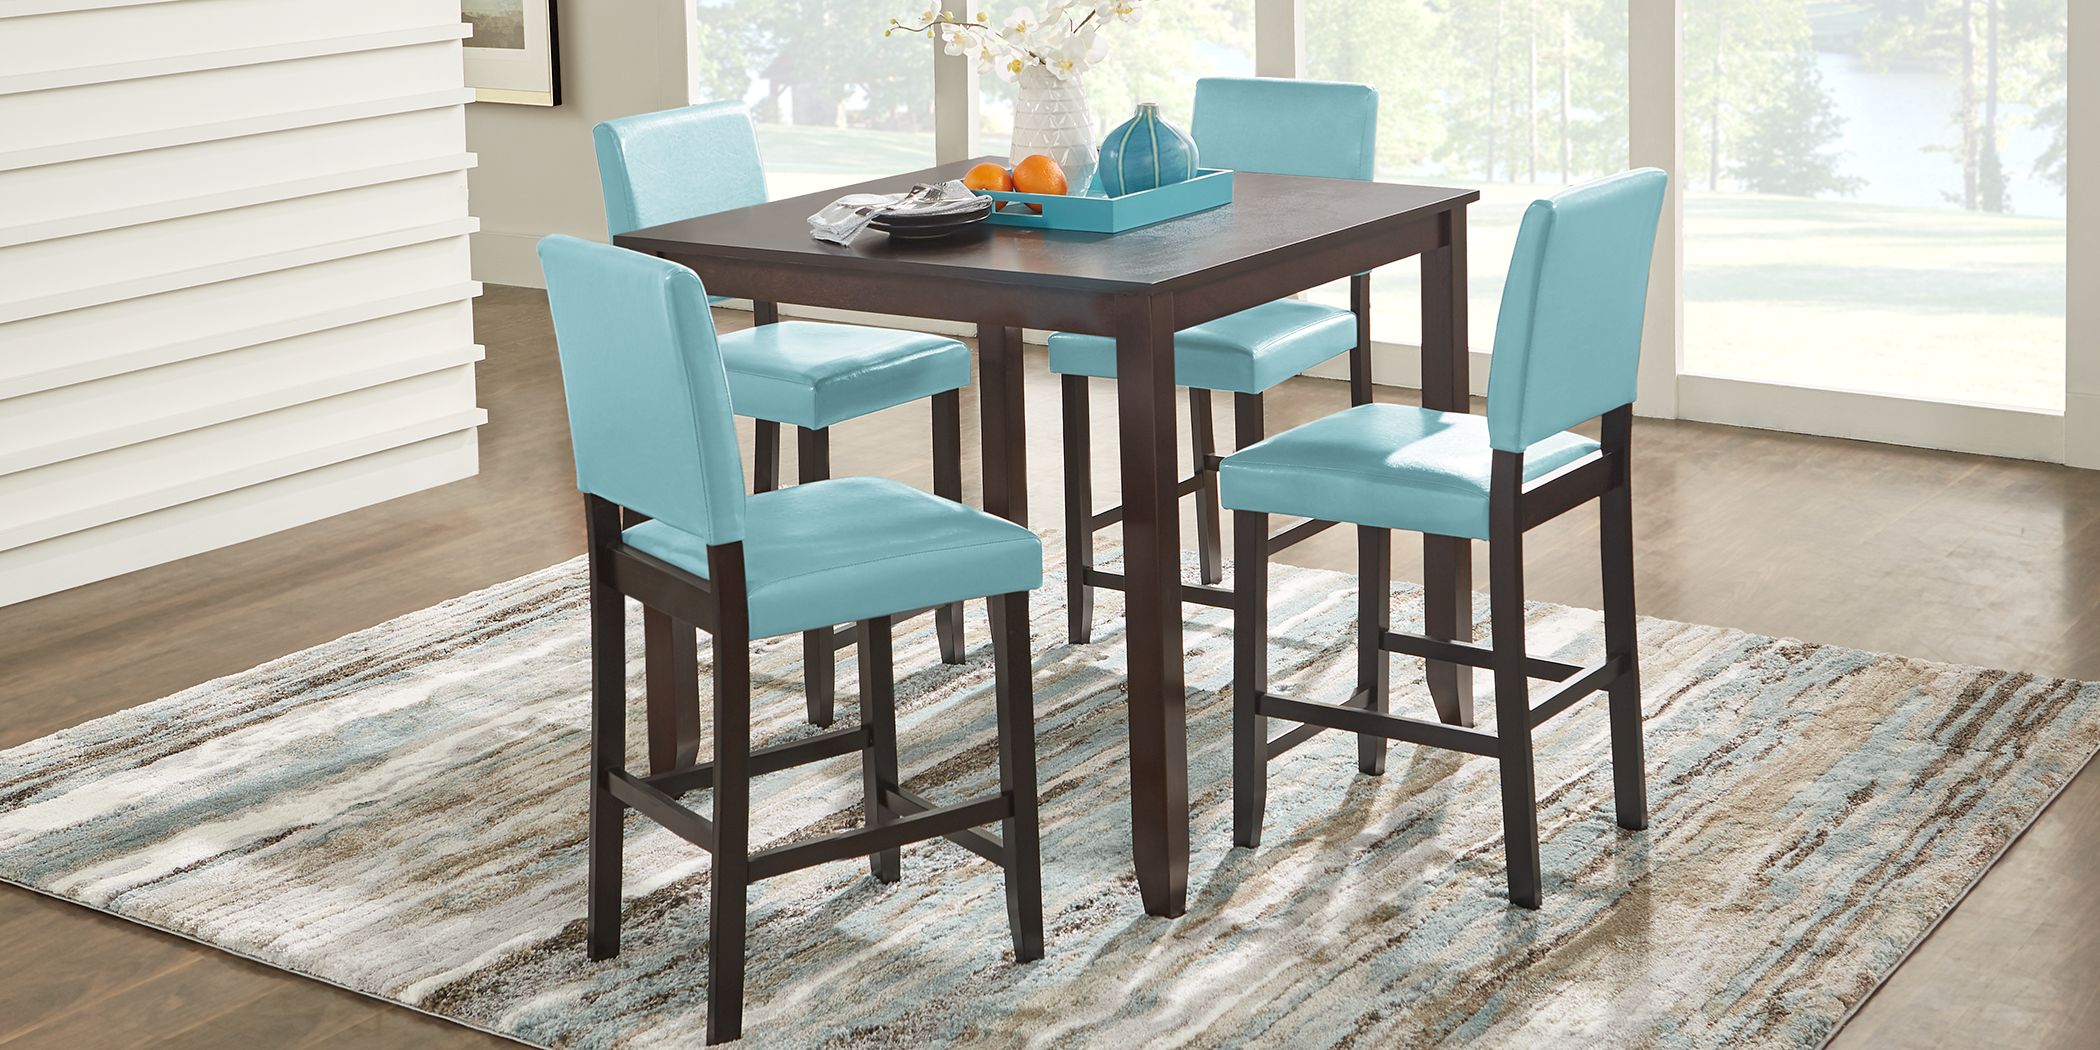 Dining Room Furniture Rooms, High Top Dining Room Table Sets